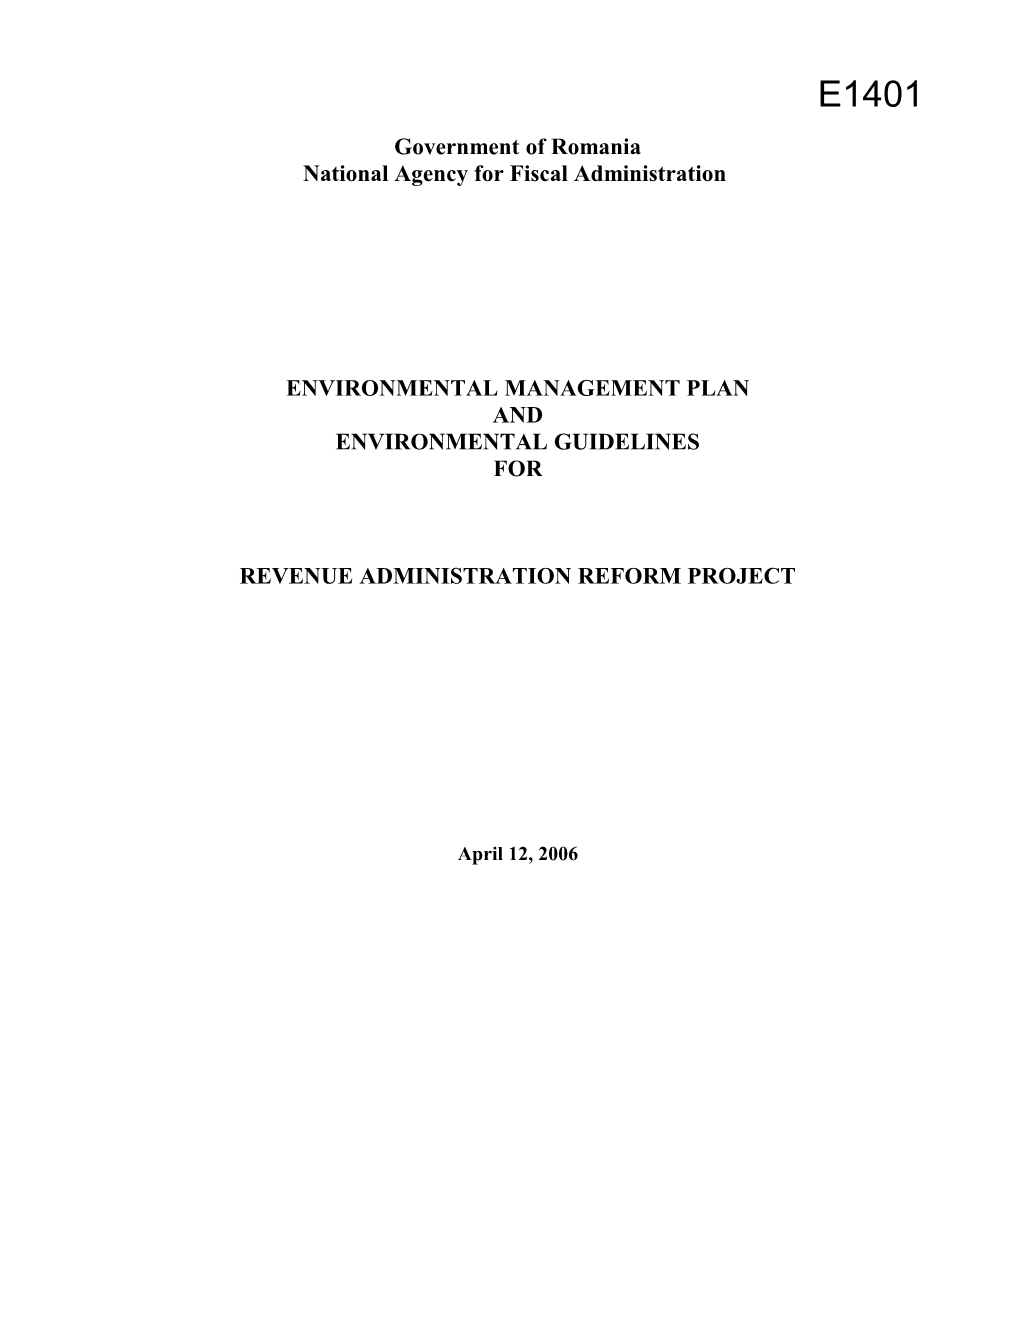 National Agency for Fiscal Administration